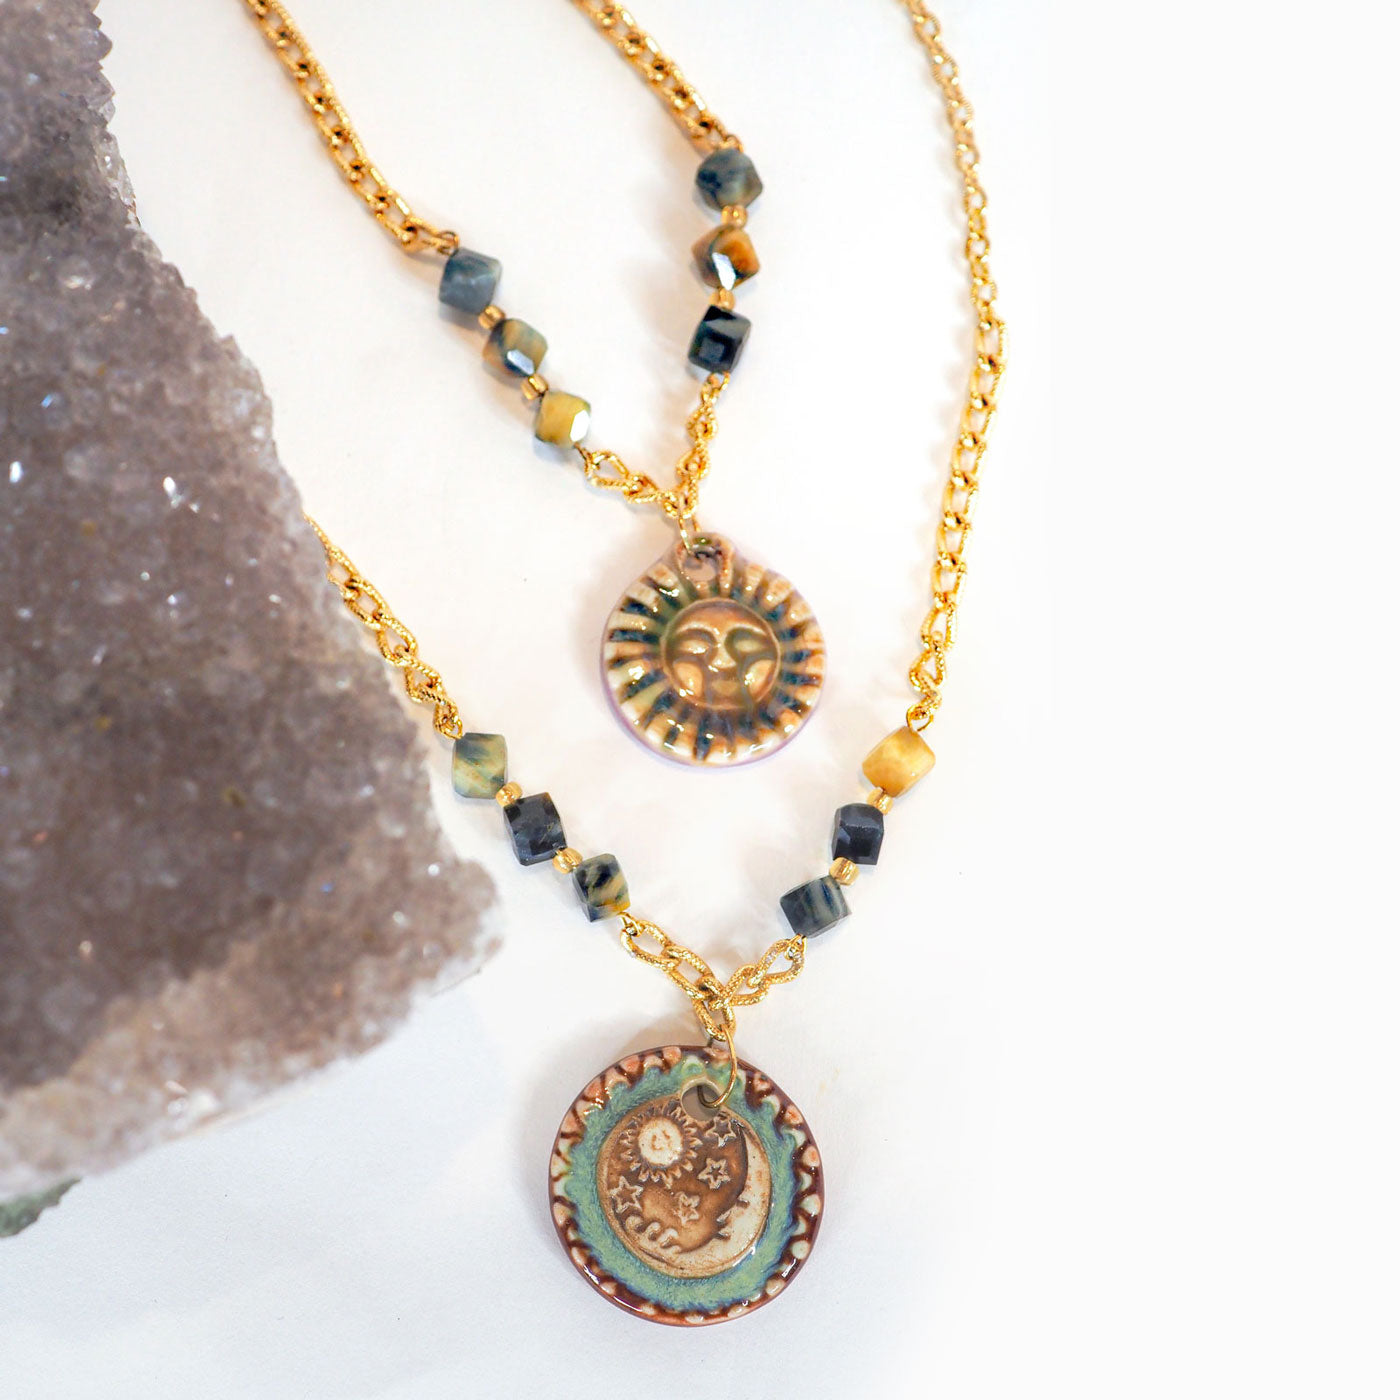 Hand-made ceramic sun and moon pendants hang between faceted blue Tiger's Eye beads on adjustable vintage gold chain necklaces.